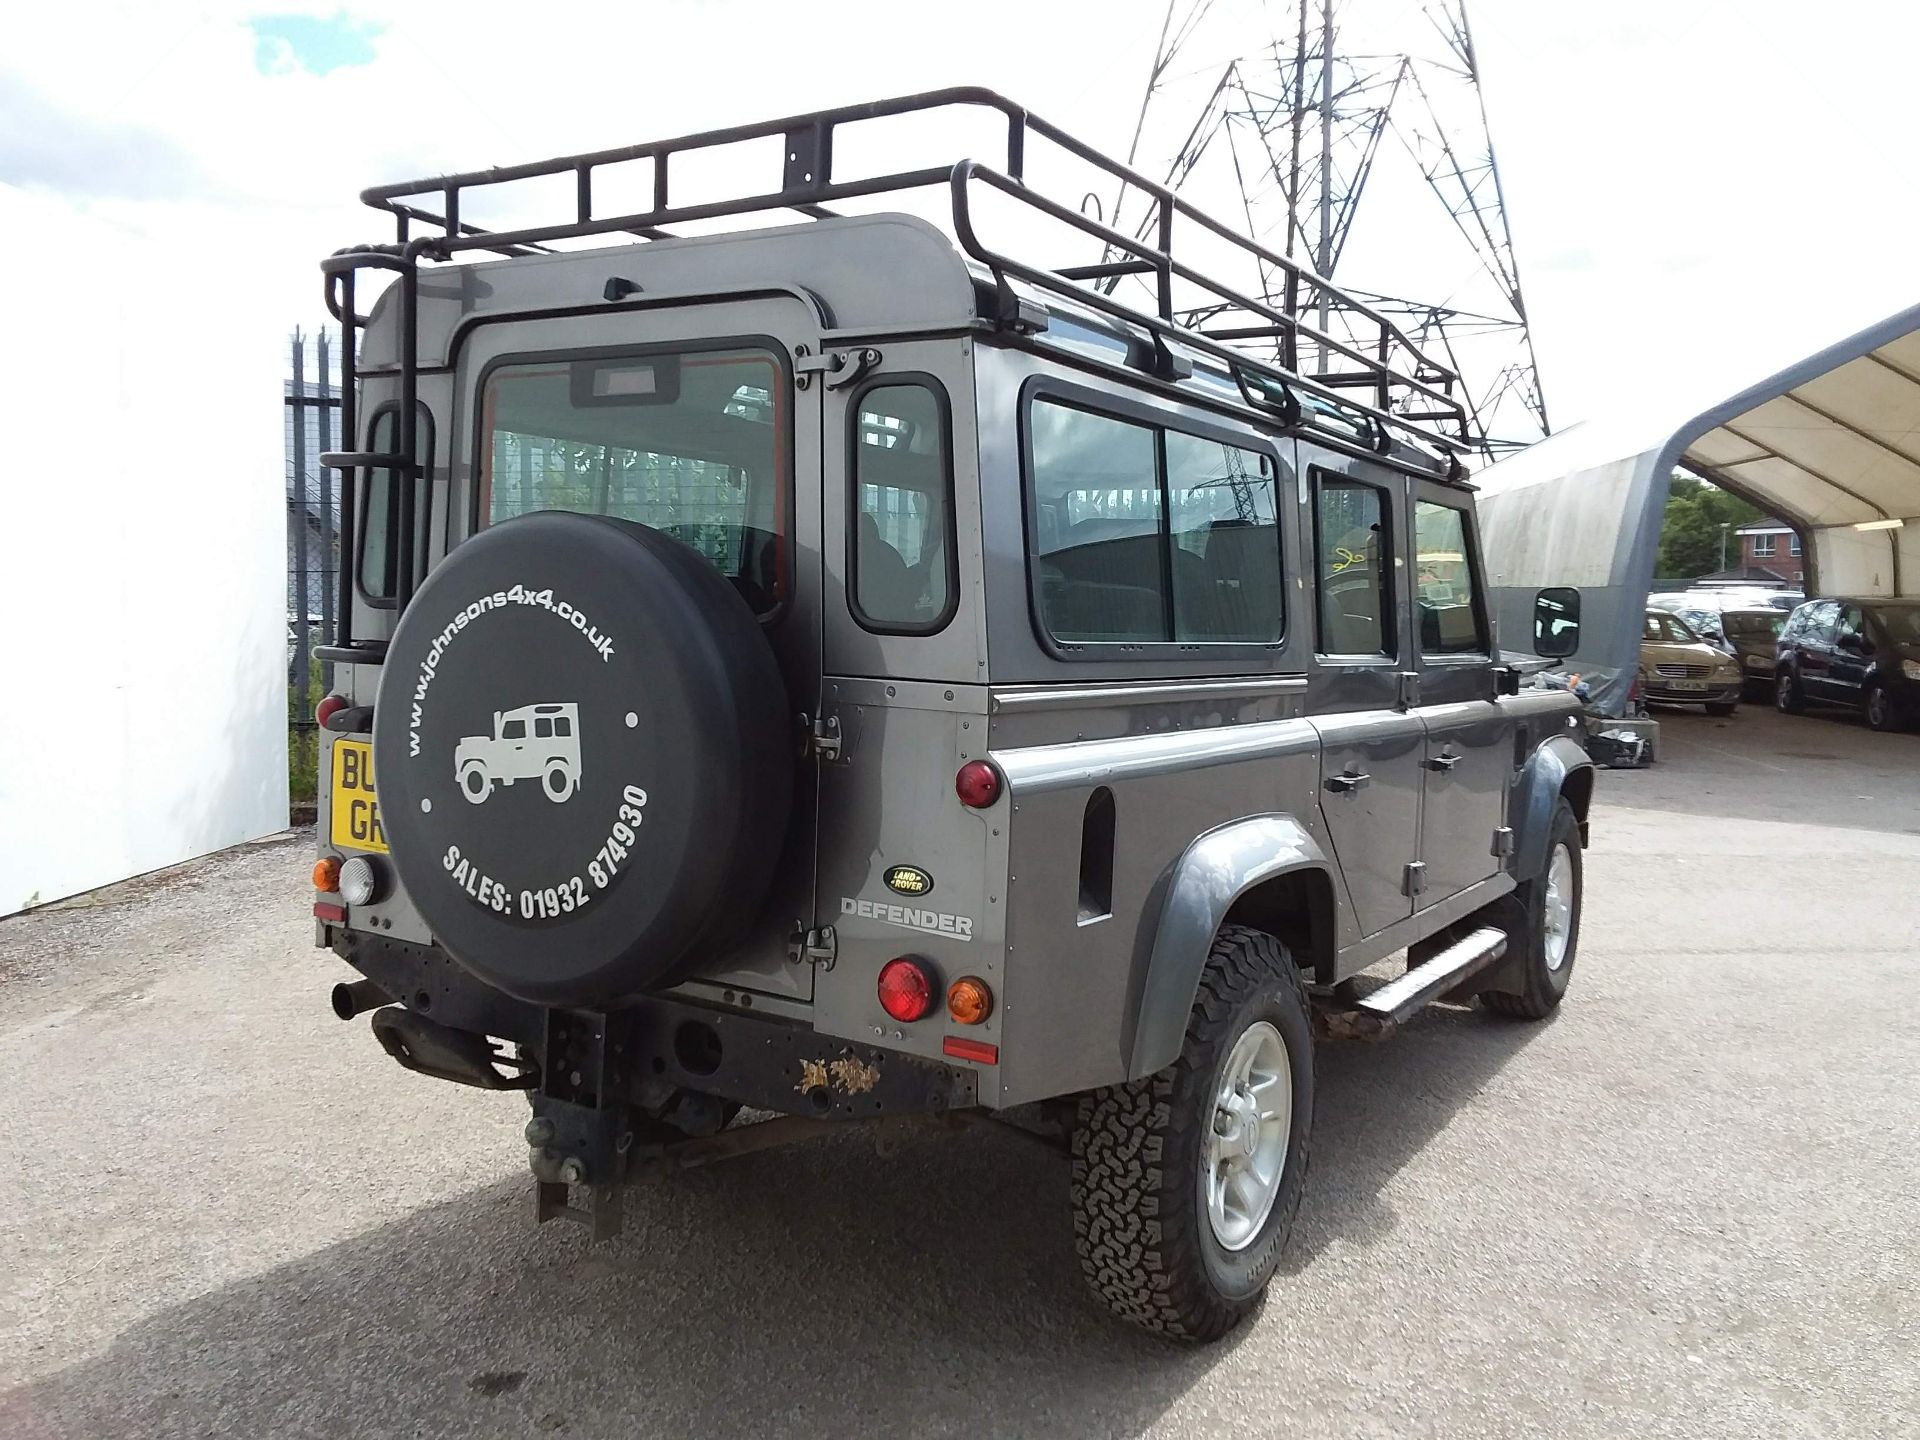 2008/08 REG LAND ROVER DEFENDER 110 XS LWB STATION WAGON 2.4 DIESEL, 7 SEATER, AIR CON *NO VAT* - Image 6 of 10